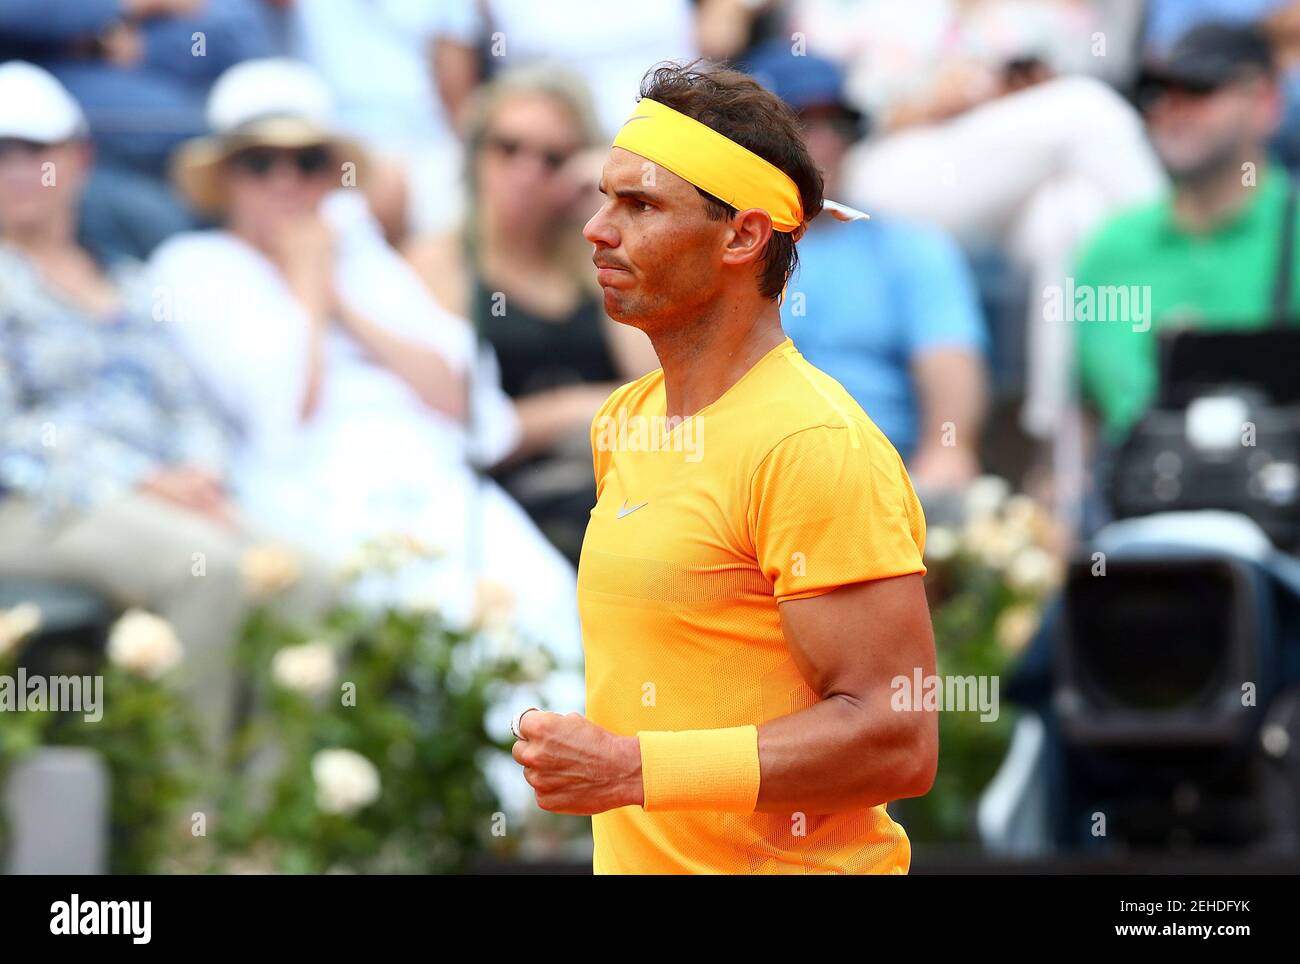 Tennis - ATP World Tour Masters 1000 - Italian Open - Foro Italico, Rome, Italy - May 18, 2018   Spain's Rafael Nadal reacts during his quarter final match against Italy's Fabio Fognini   REUTERS/Alessandro Bianchi Stock Photo